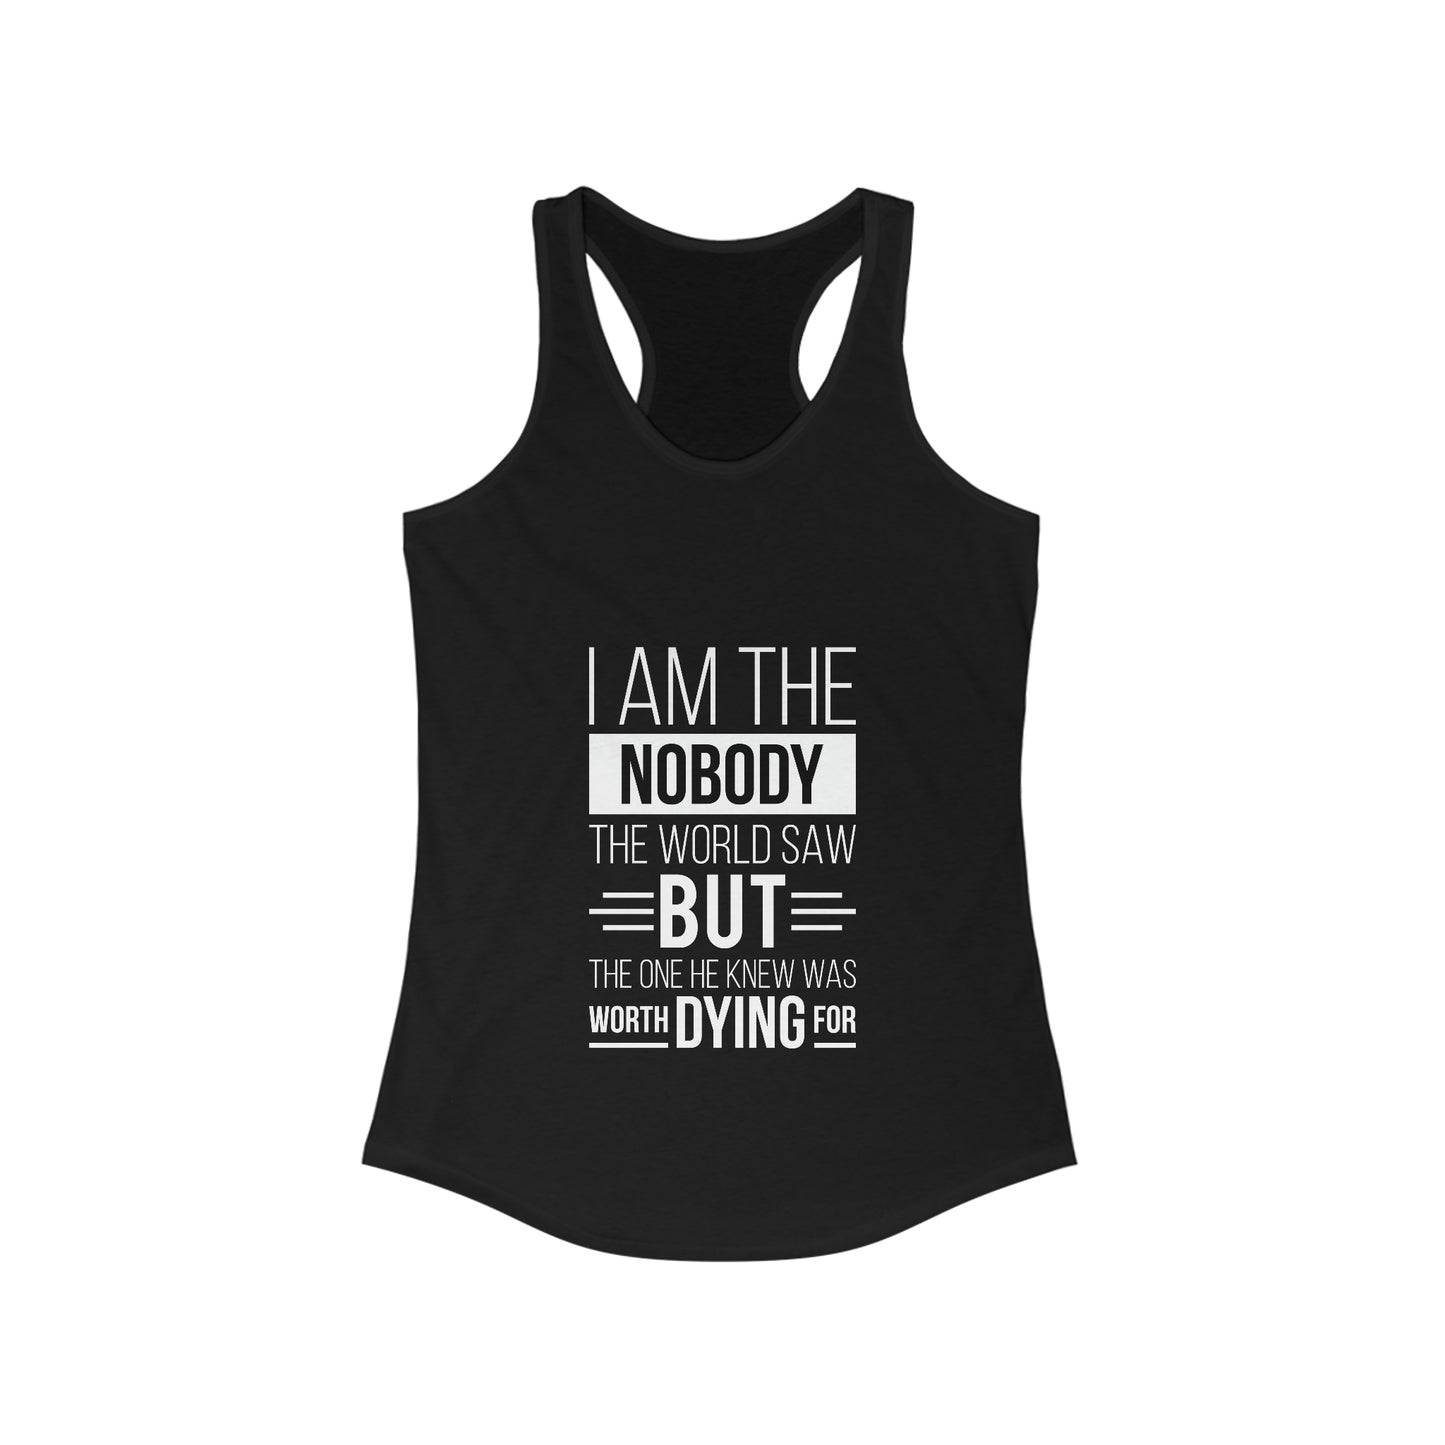 I Am the Nobody The World Saw But The One He Knew Was Worth Dying For slim fit tank-top